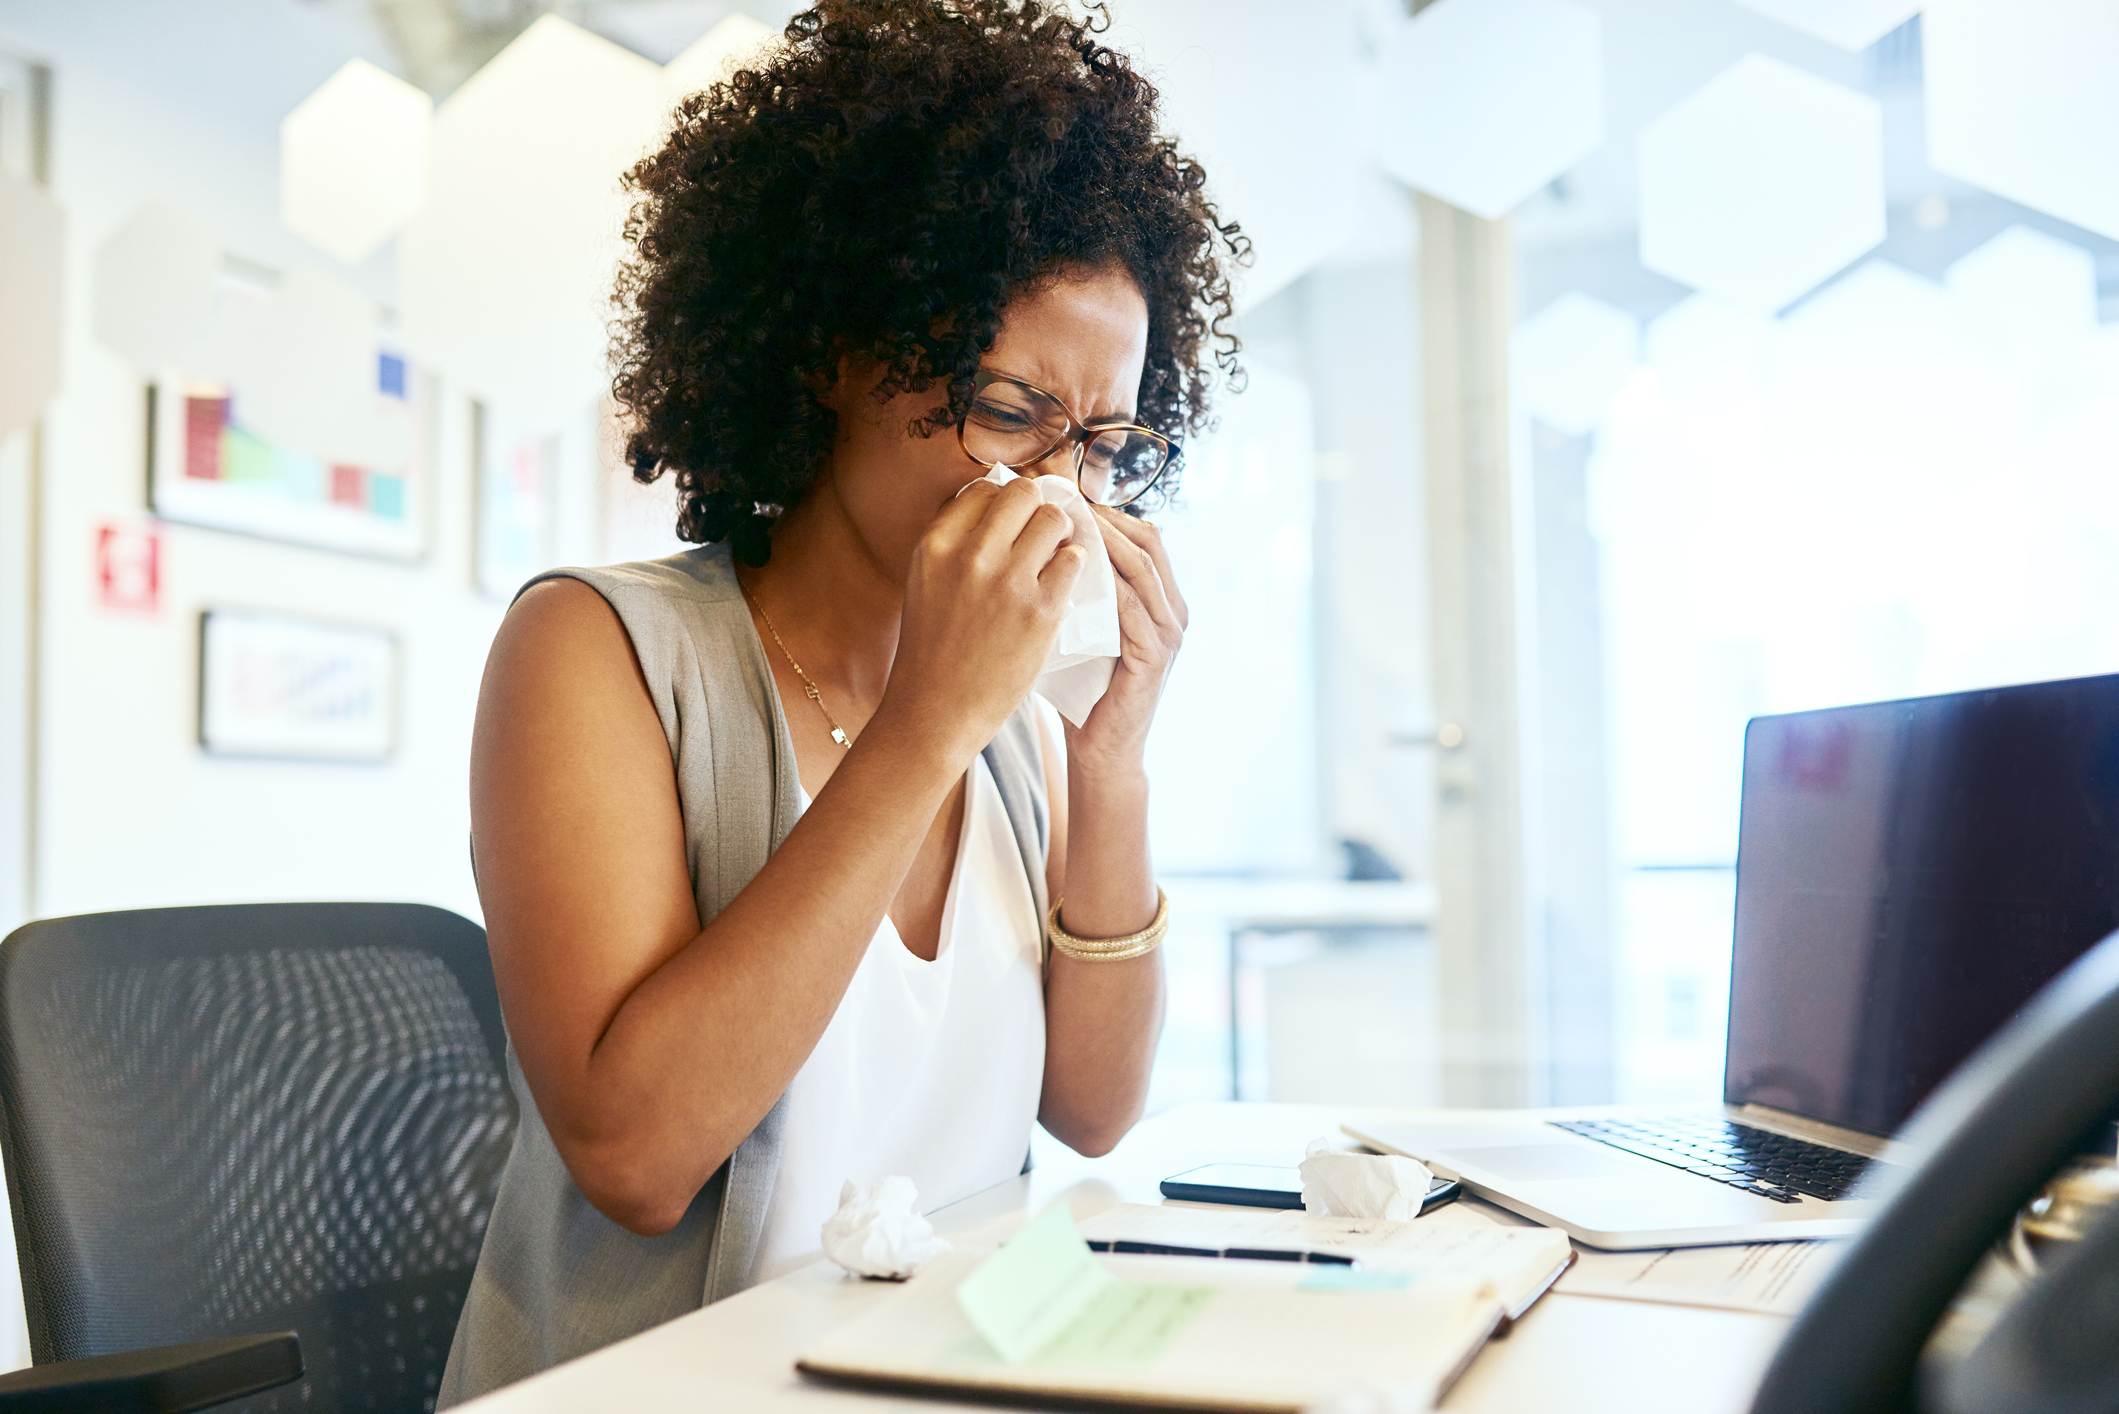 A sick woman blowing her nose at her desk in an office.